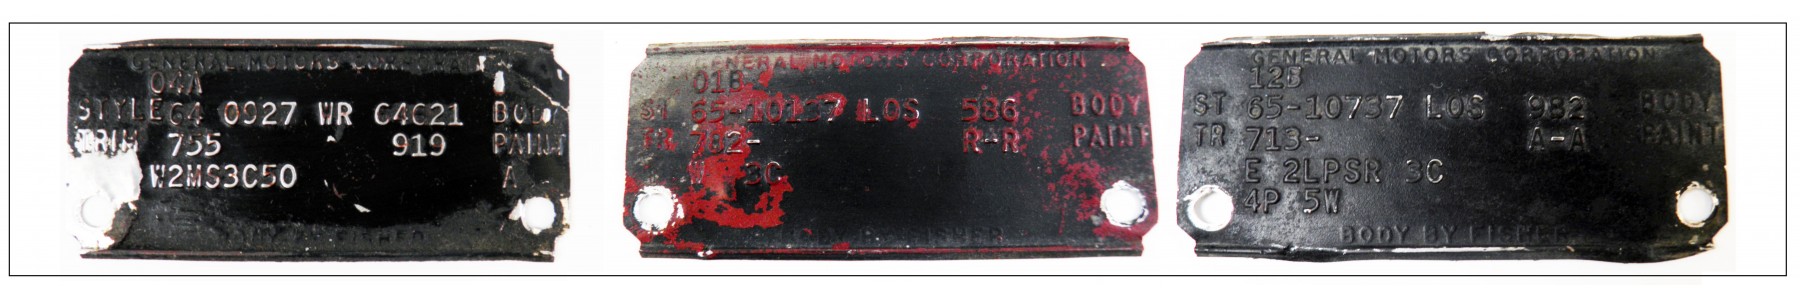 USED 1963 BODY TAGS